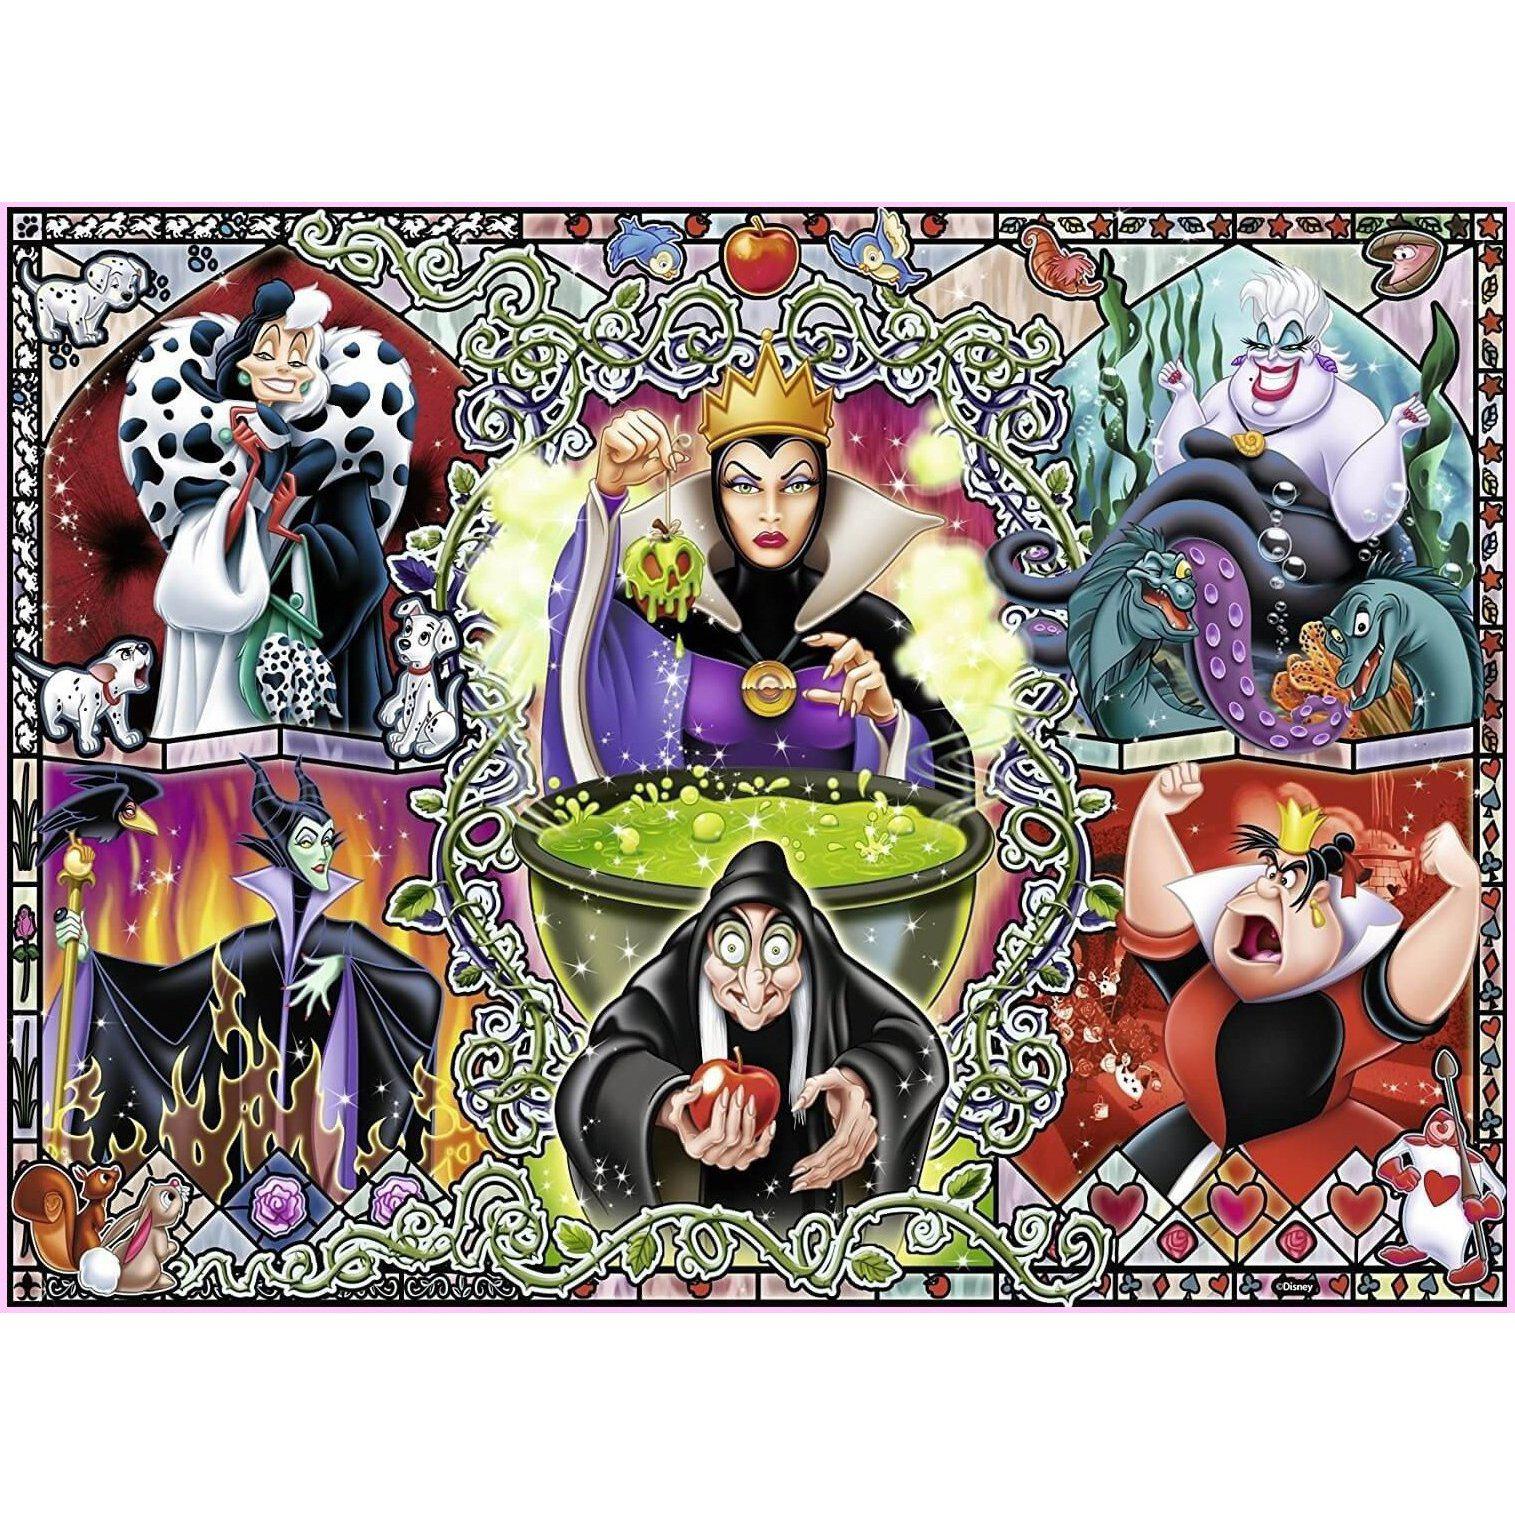 Disney Villains (canvas) full round or square drill diamond painting